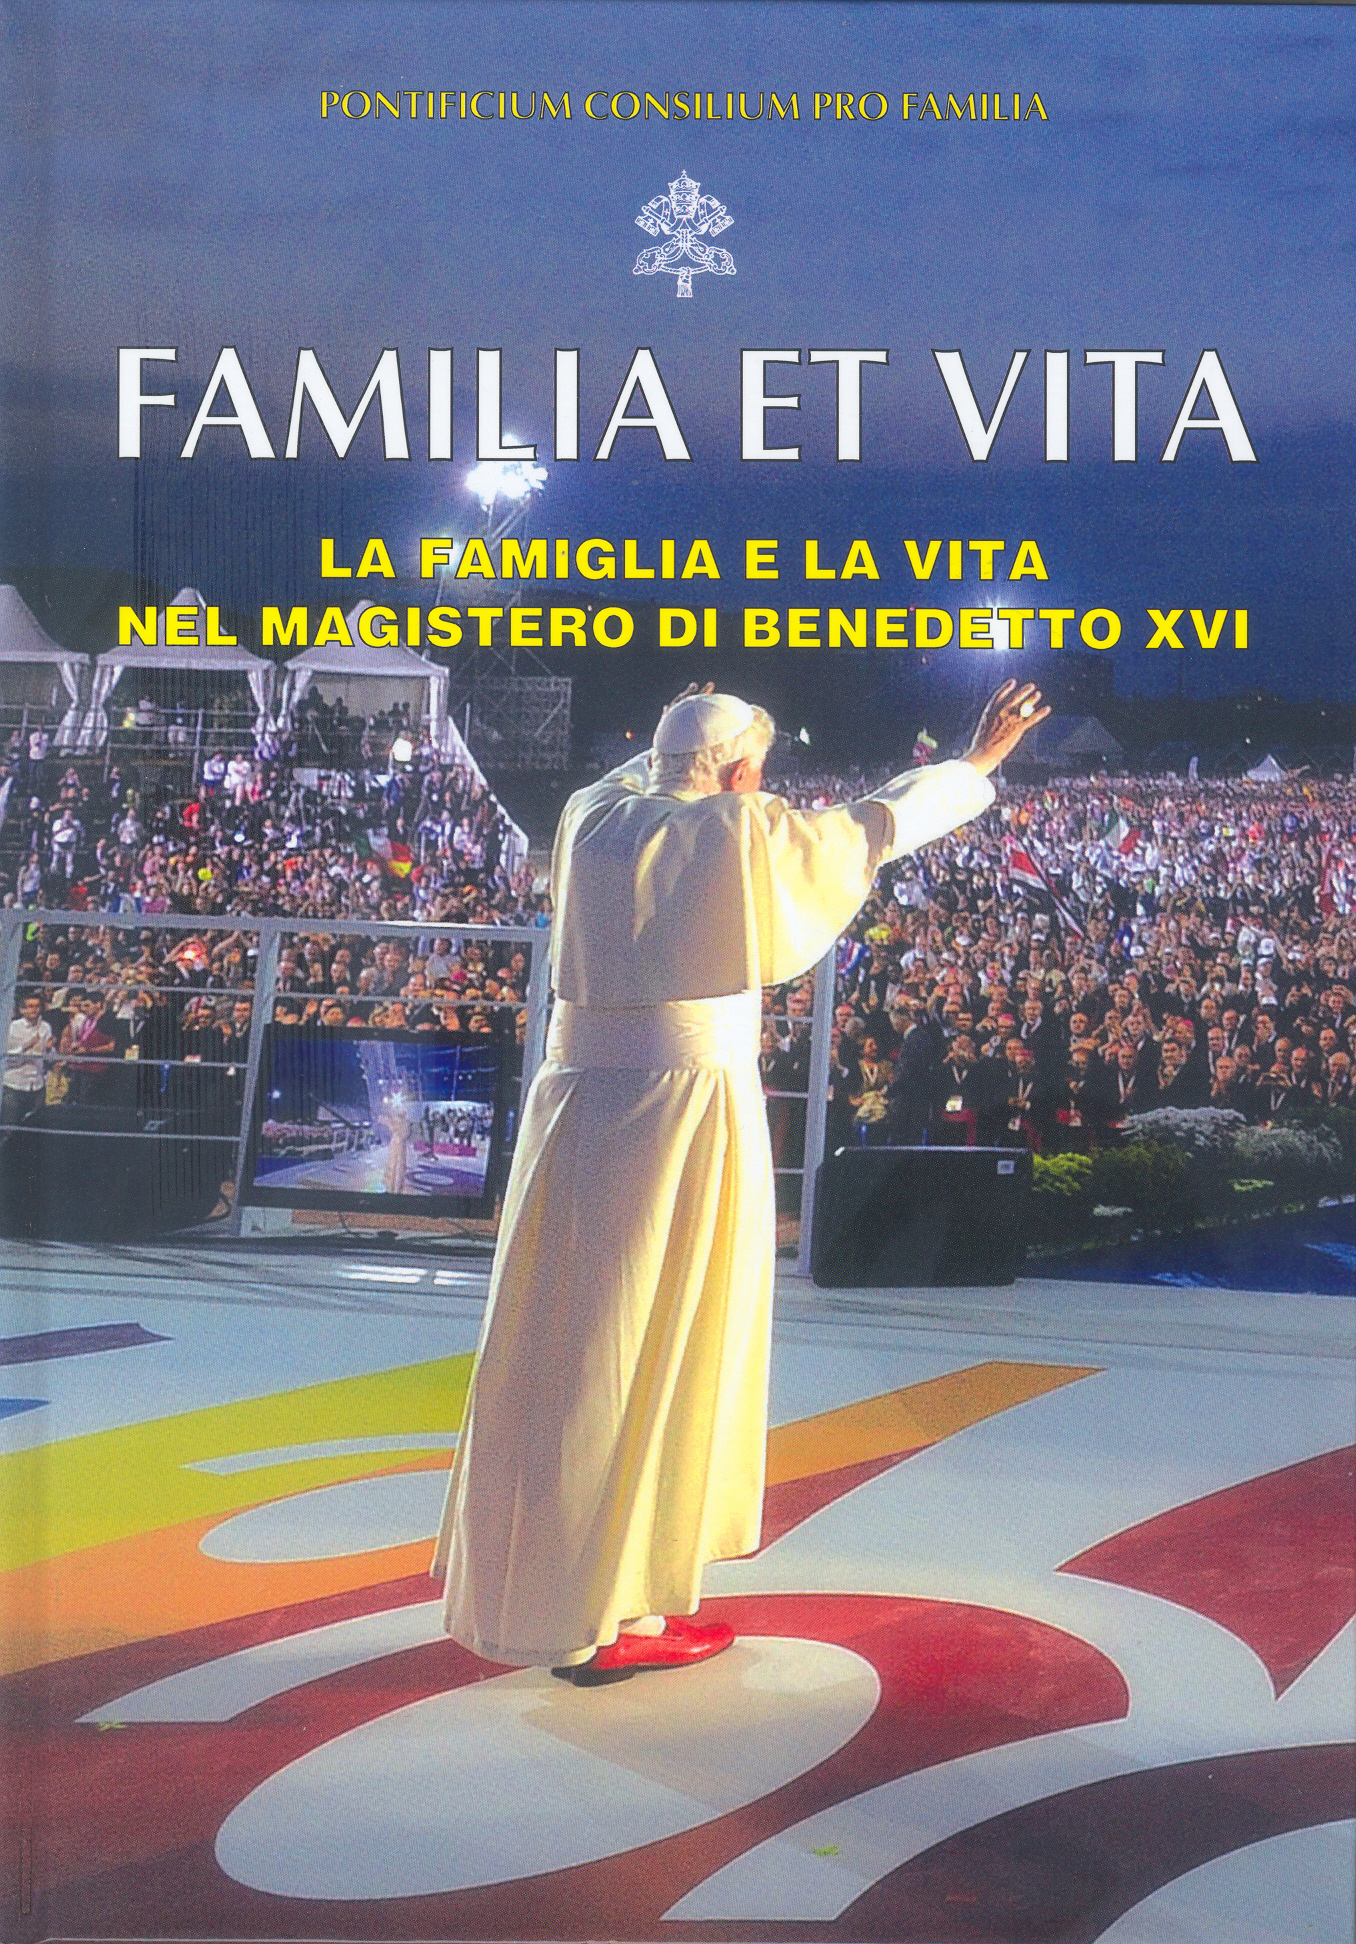 The Family and Life in the Magisterium of Benedict XVI